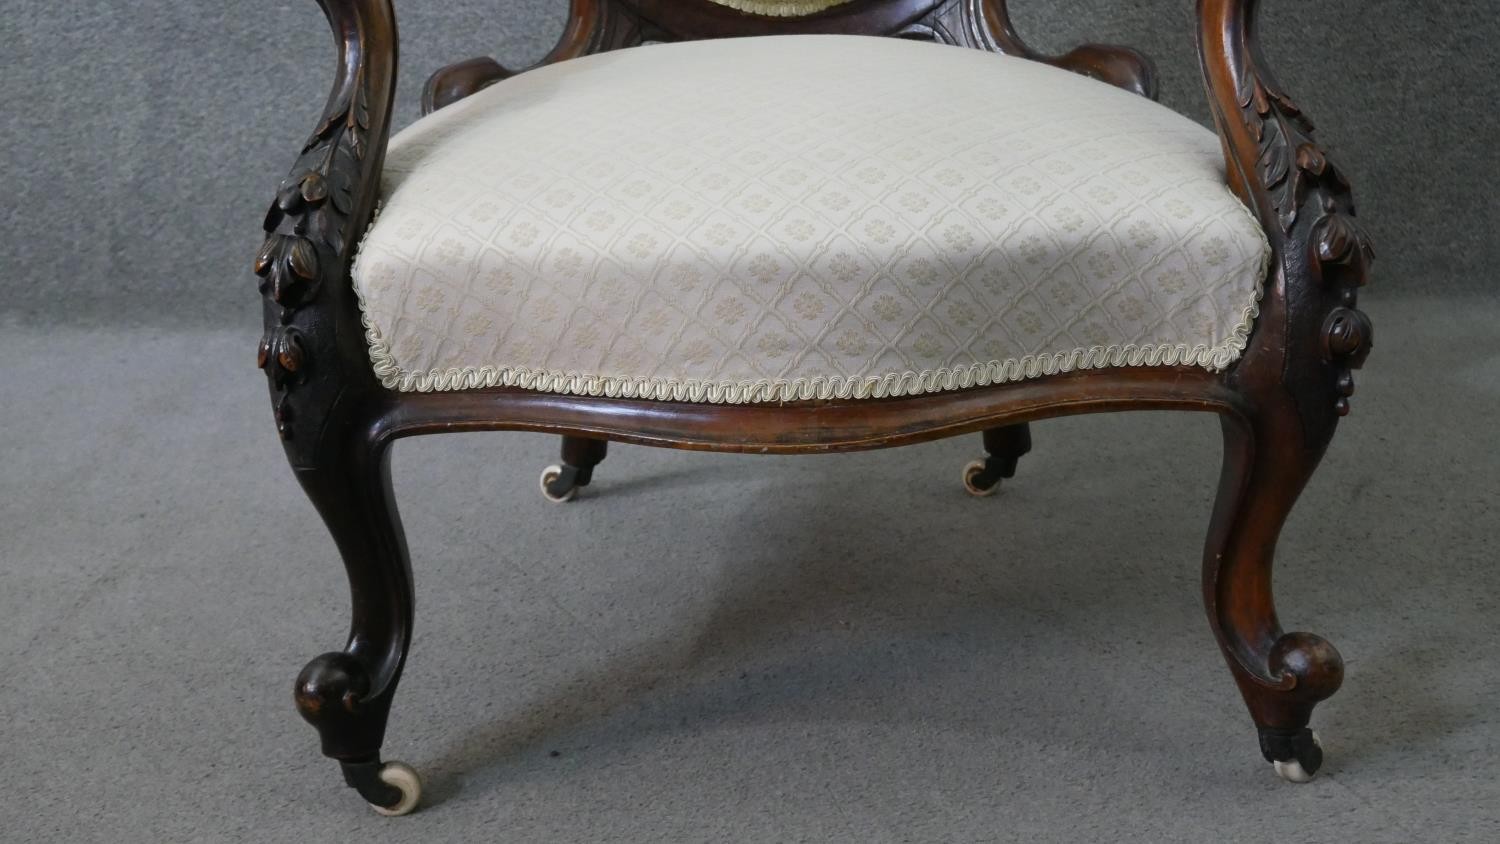 A Victorian walnut open armchair, upholstered in patterned ivory fabric, with an oval buttoned back, - Image 2 of 7